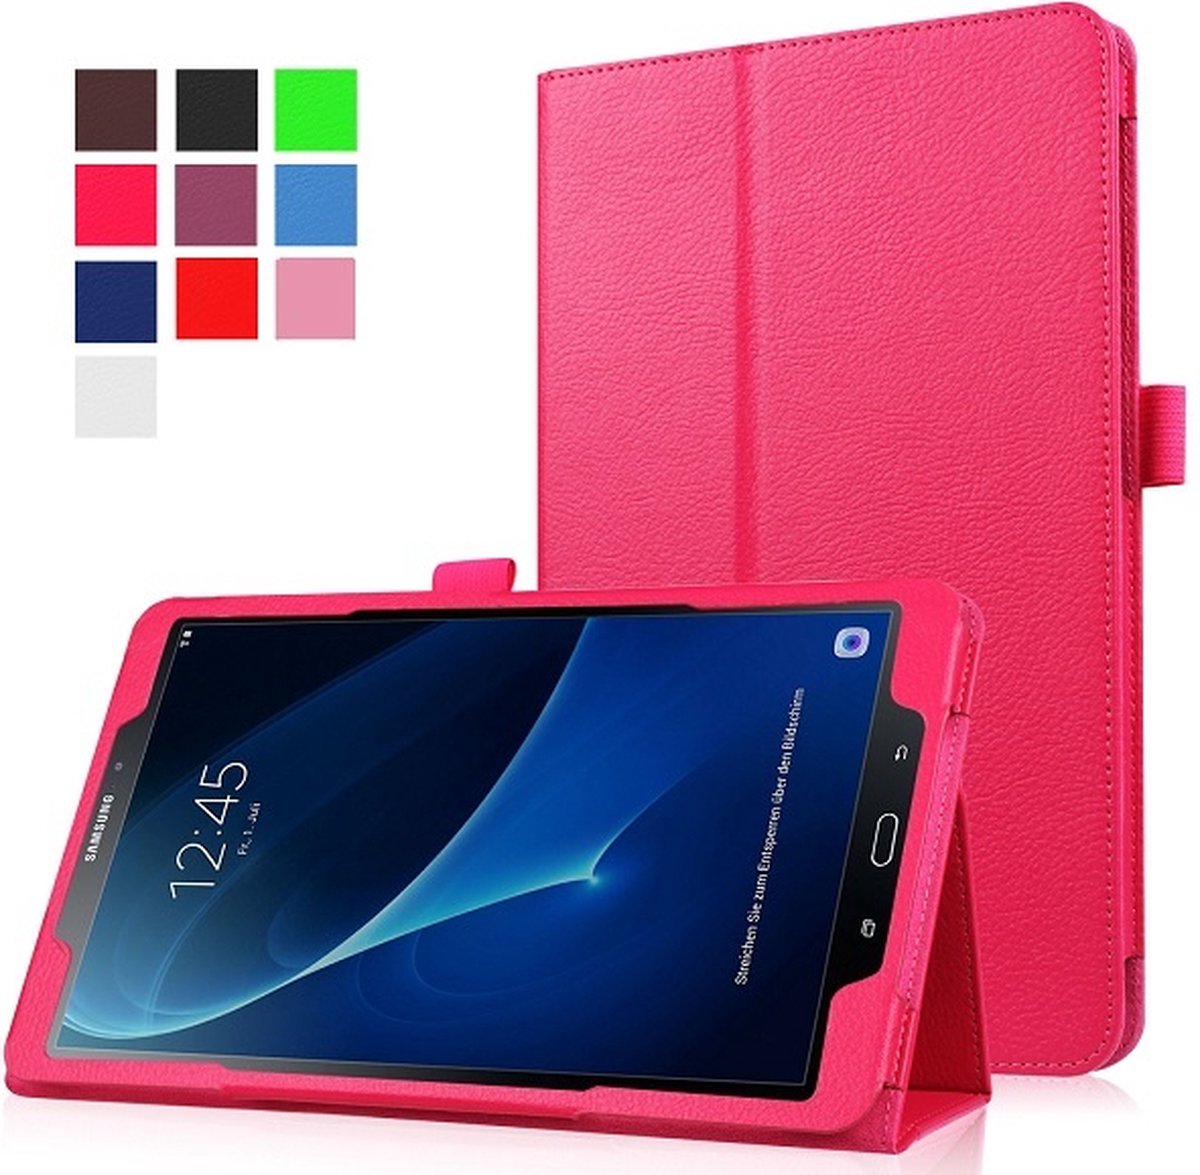 Stand flip sleepcover hoes - Samsung Galaxy Tab A 10.1 inch (2016) - Roze